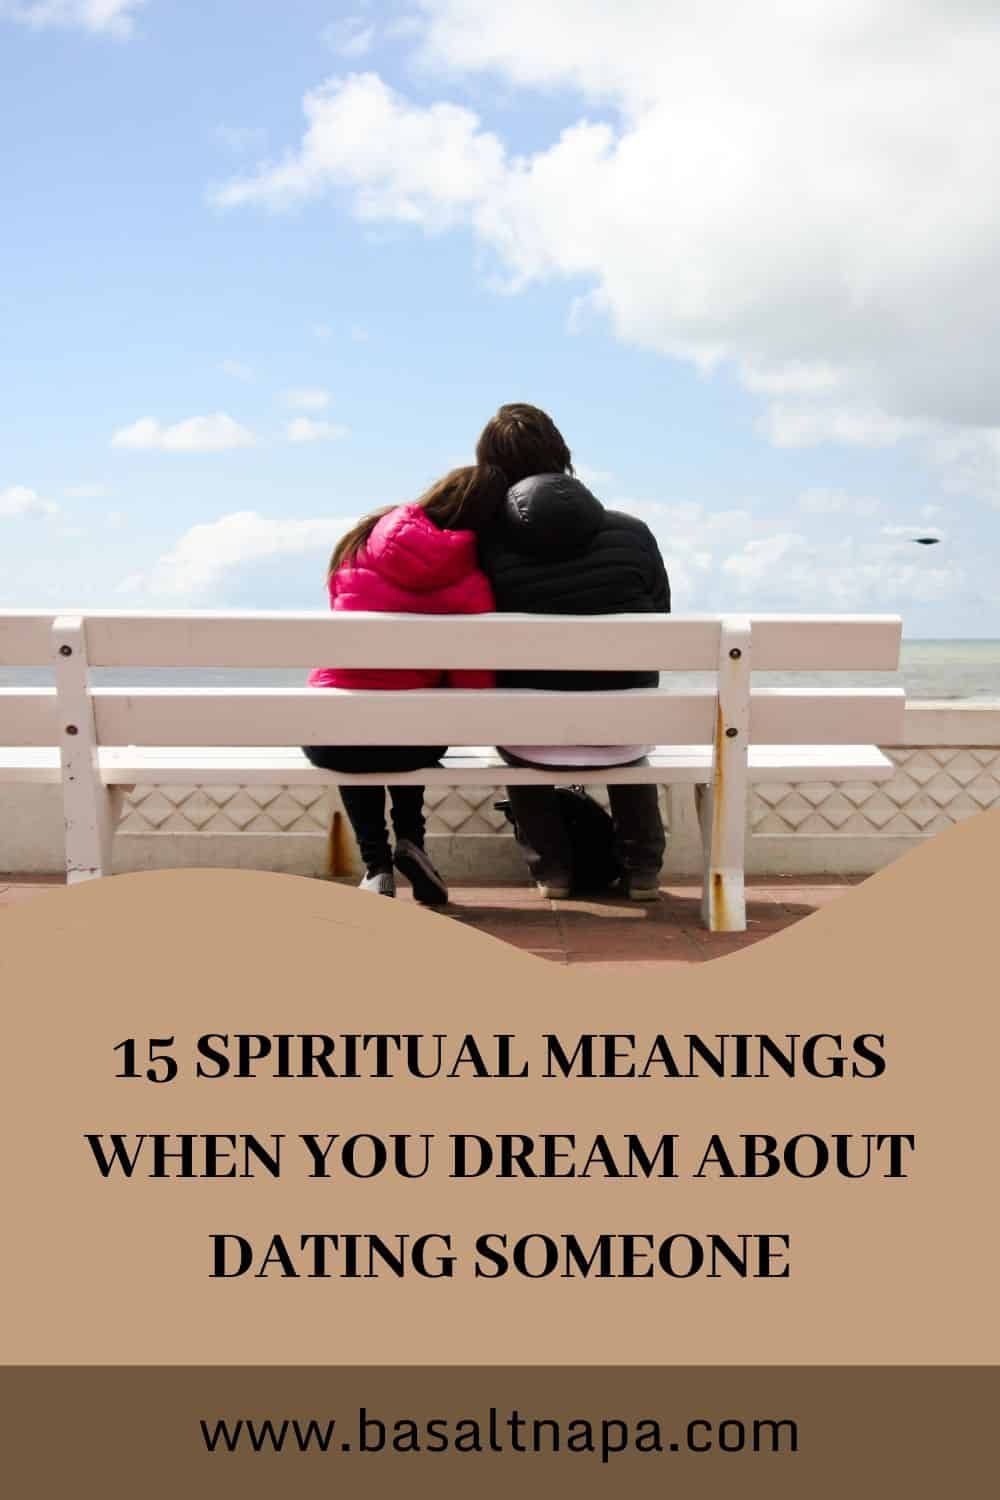 15 Spiritual Meanings When You Dream About Dating Someone